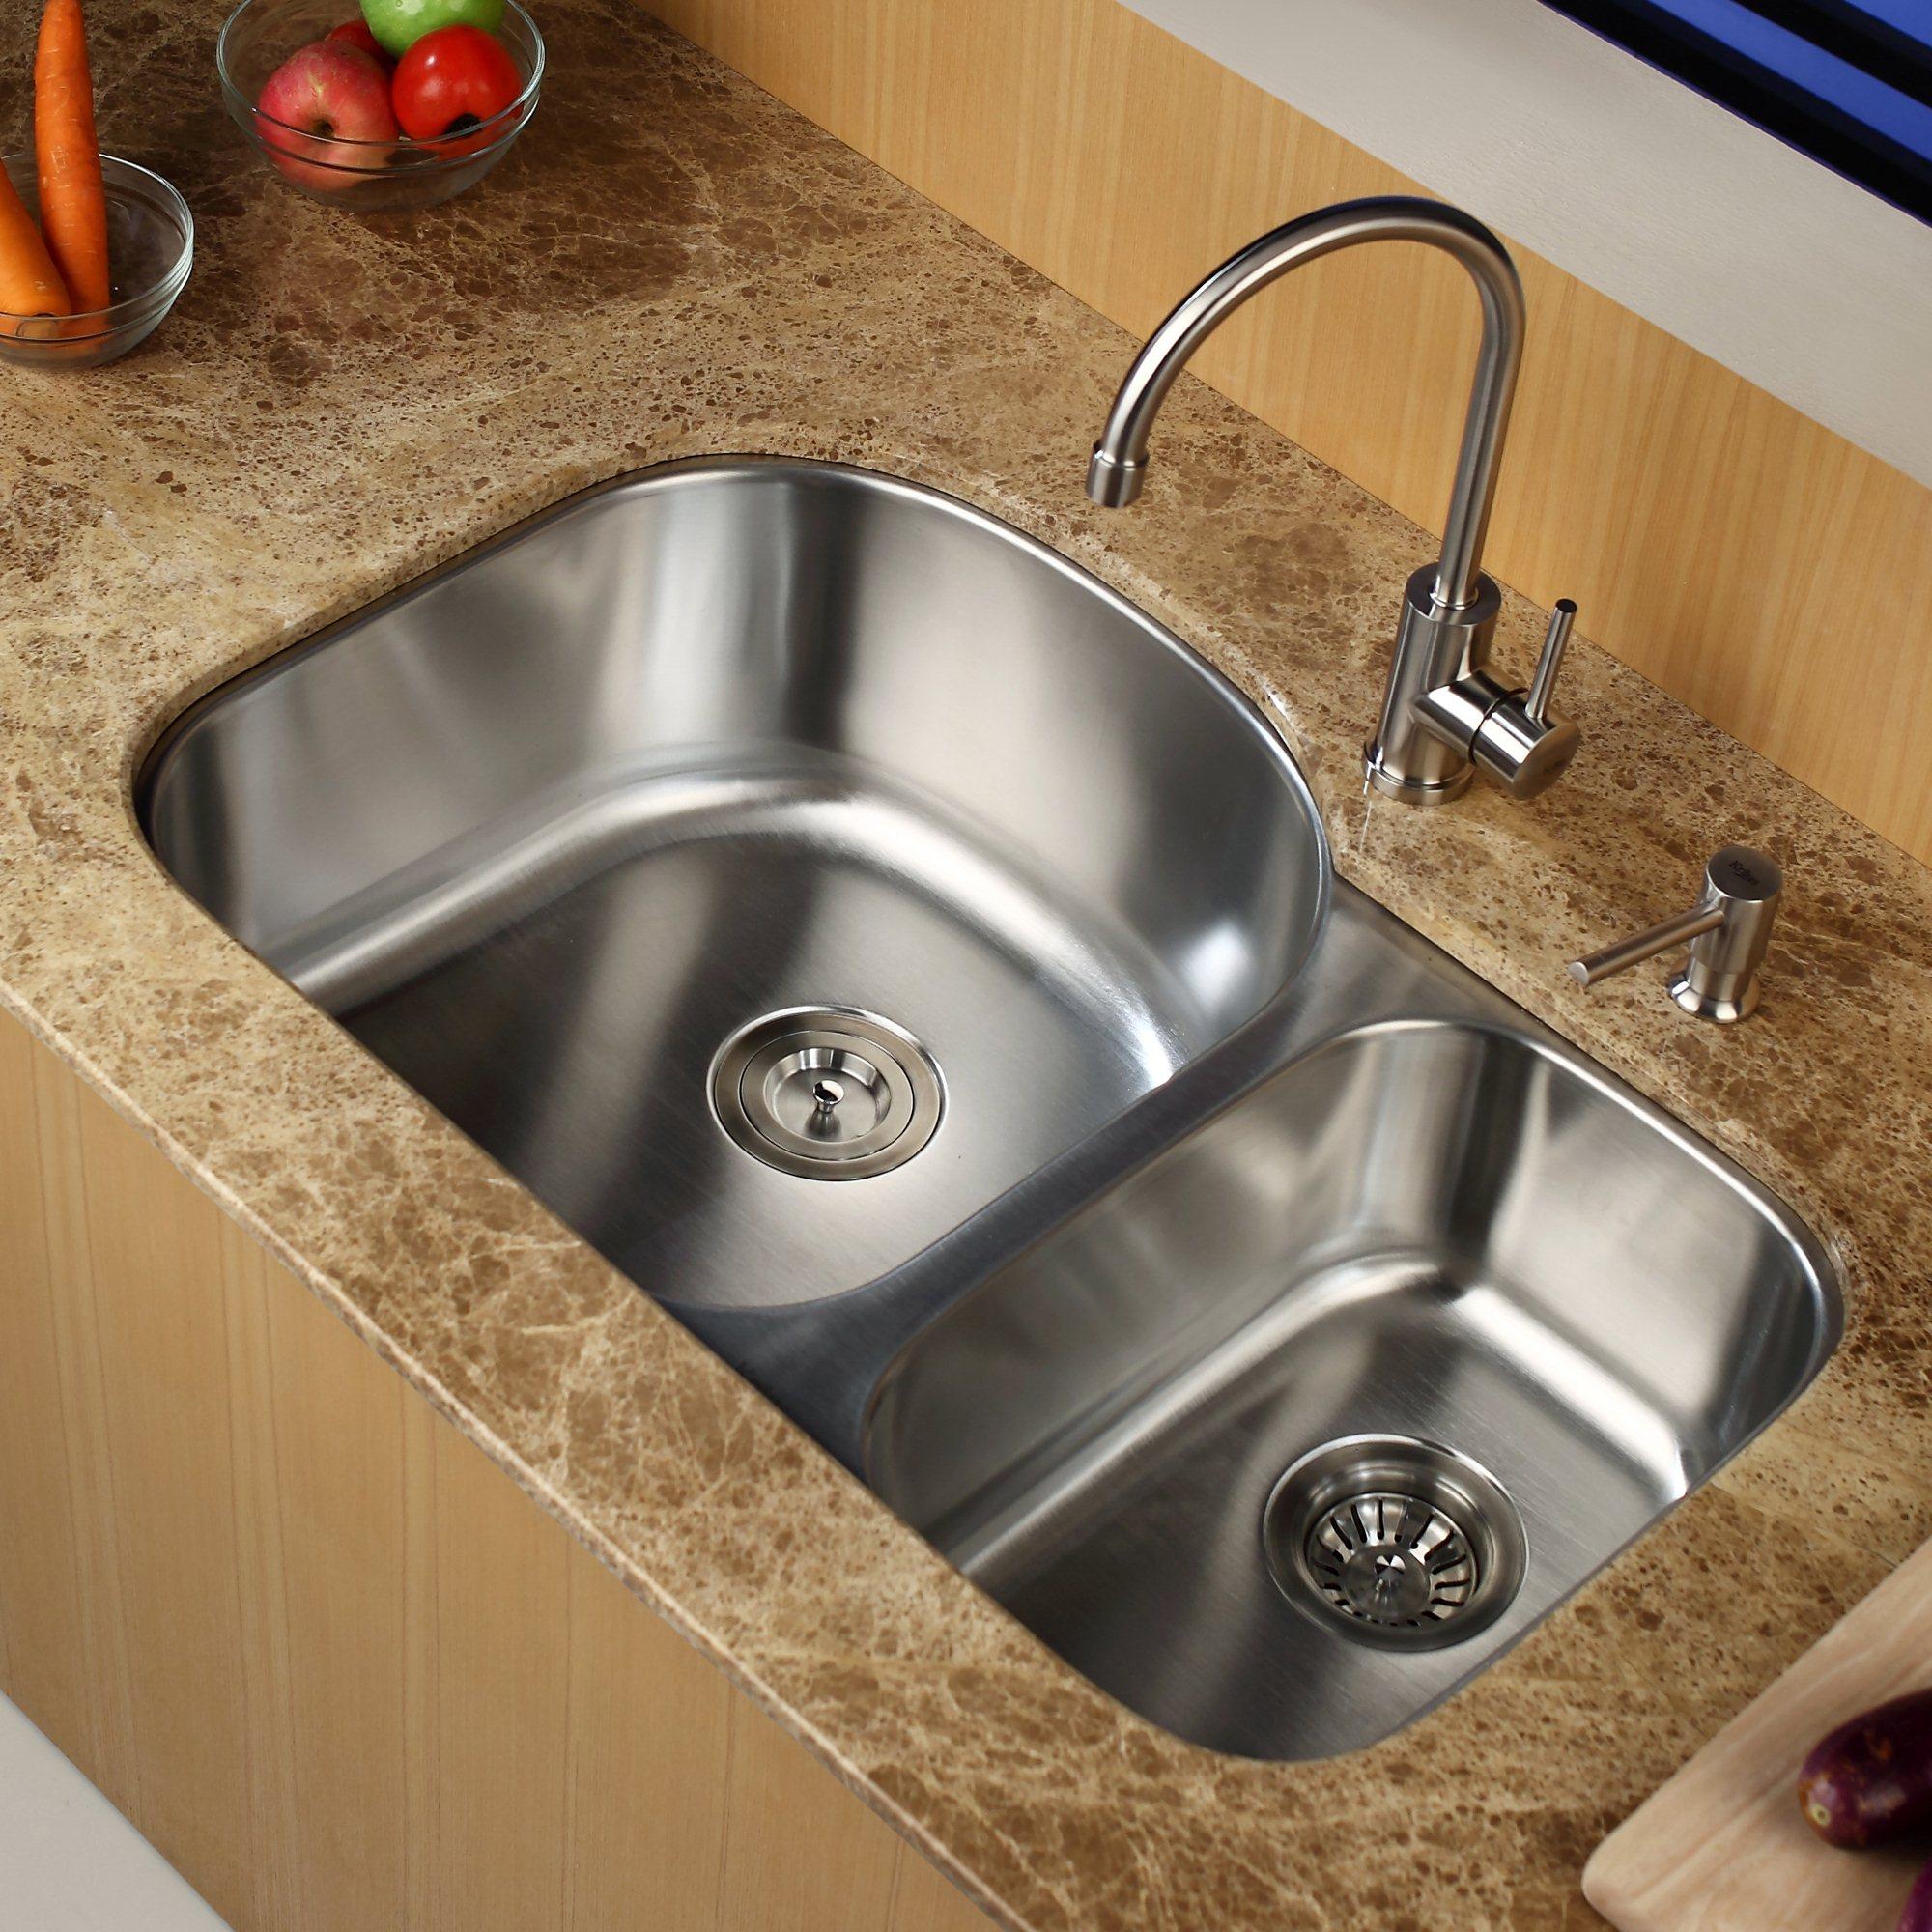 KRAUS 32 Inch Undermount Double Bowl Stainless Steel Kitchen Sink with Pull  Out Kitchen Faucet and Soap Dispenser - Bed Bath & Beyond - 4389953